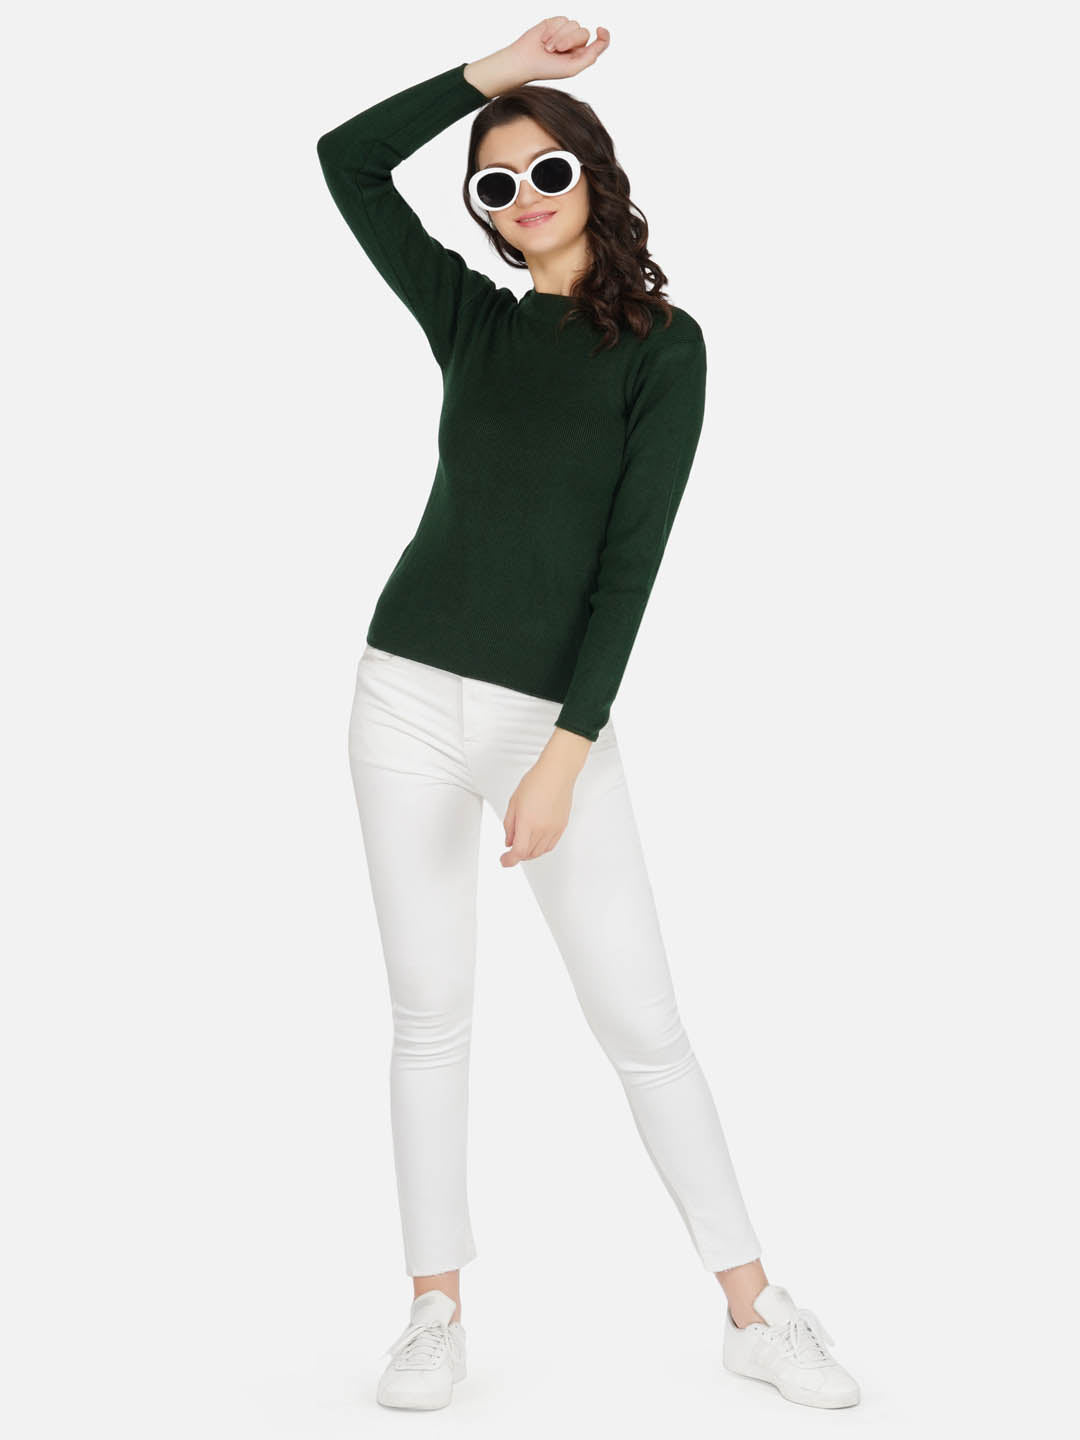 Olive Round Neck Knitted Sweater